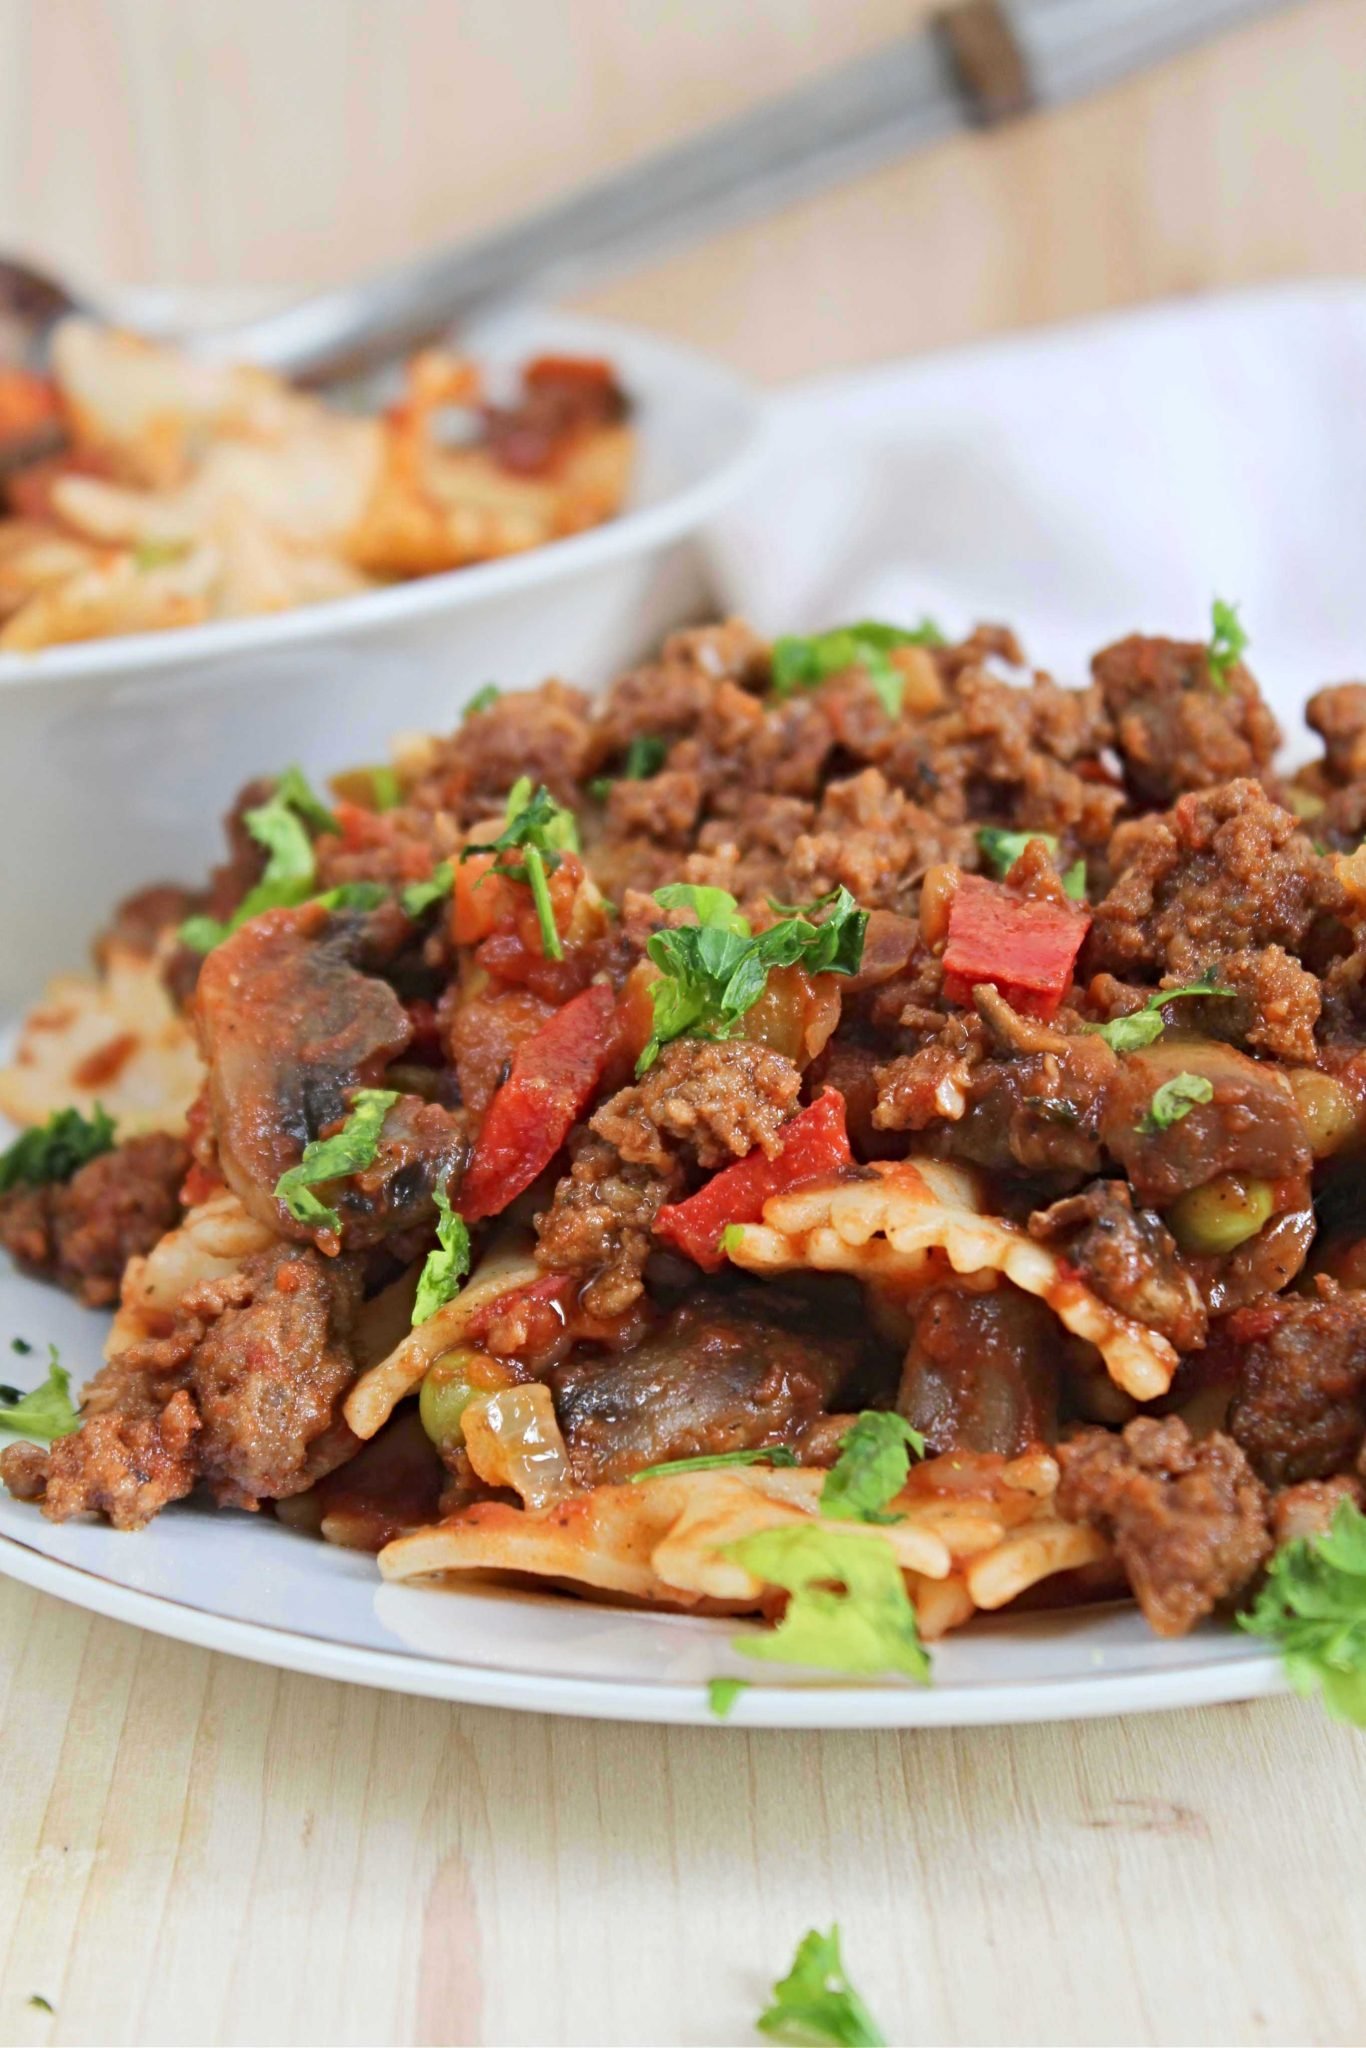 Beef Pasta With Ground Beef & Farfalle